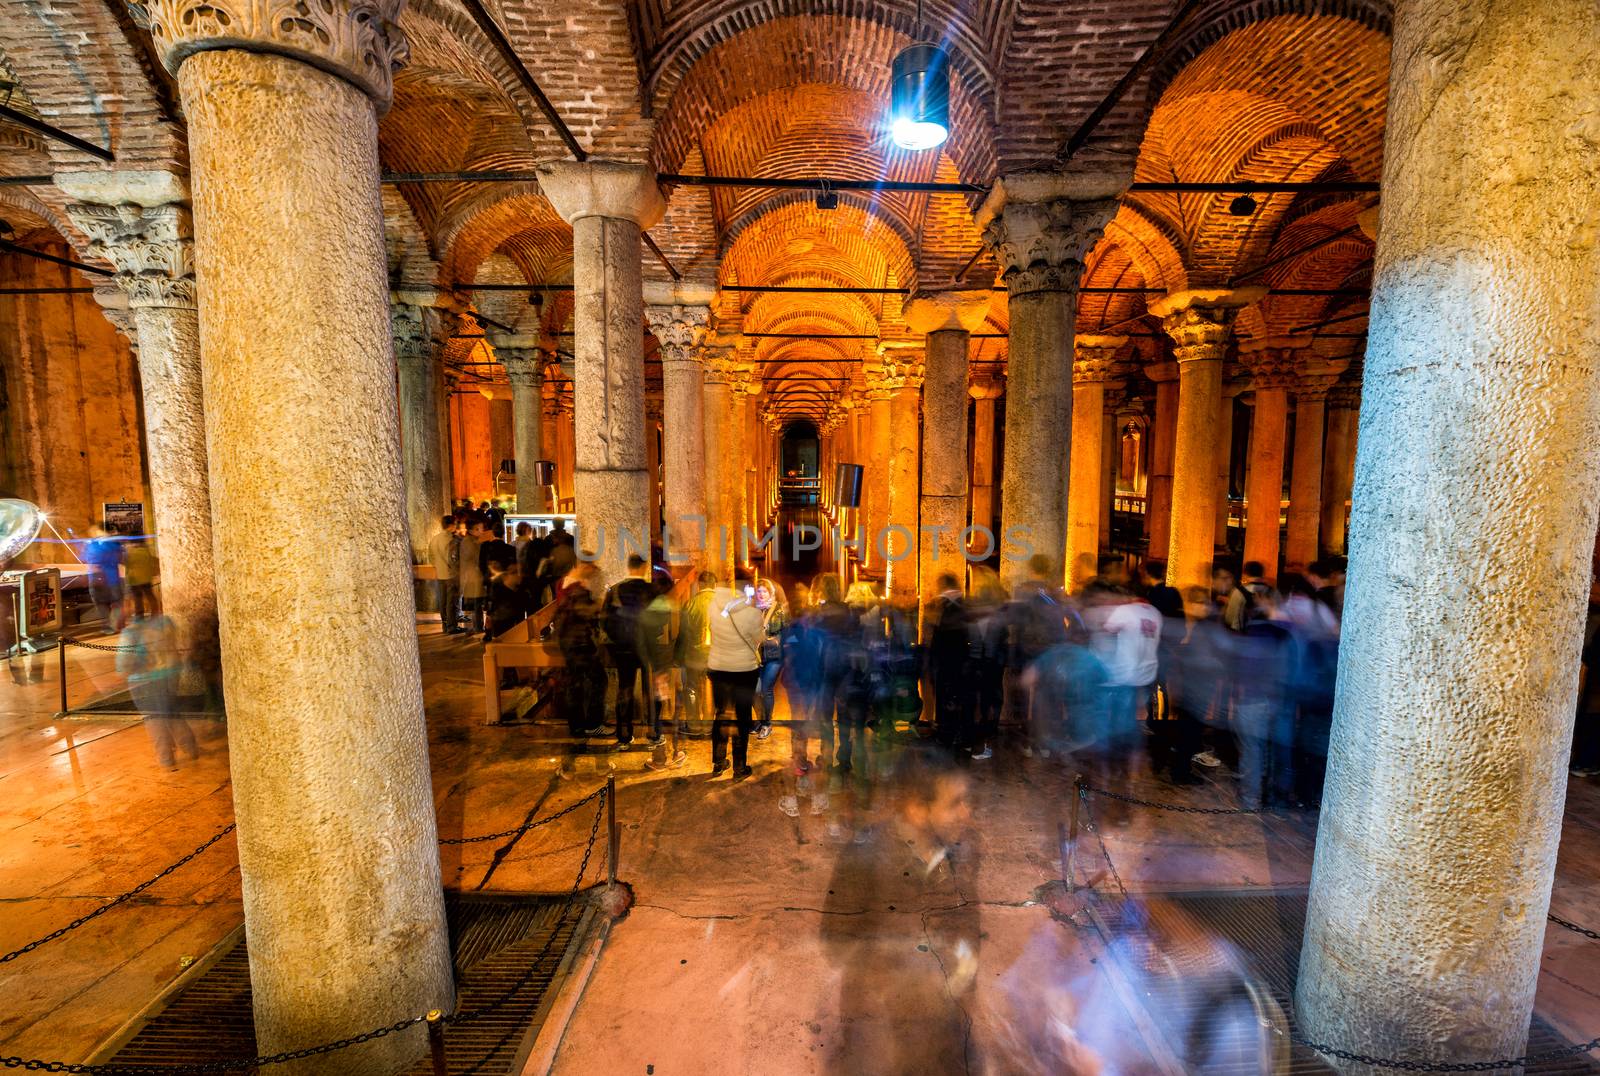 ISTANBUL - SEPTEMBER 16: Underground Basilica Cistern, September, 2014 in Istanbul, Turkey. It is 143m long and 65m wide underground water container, the one of most popular tourist attraction